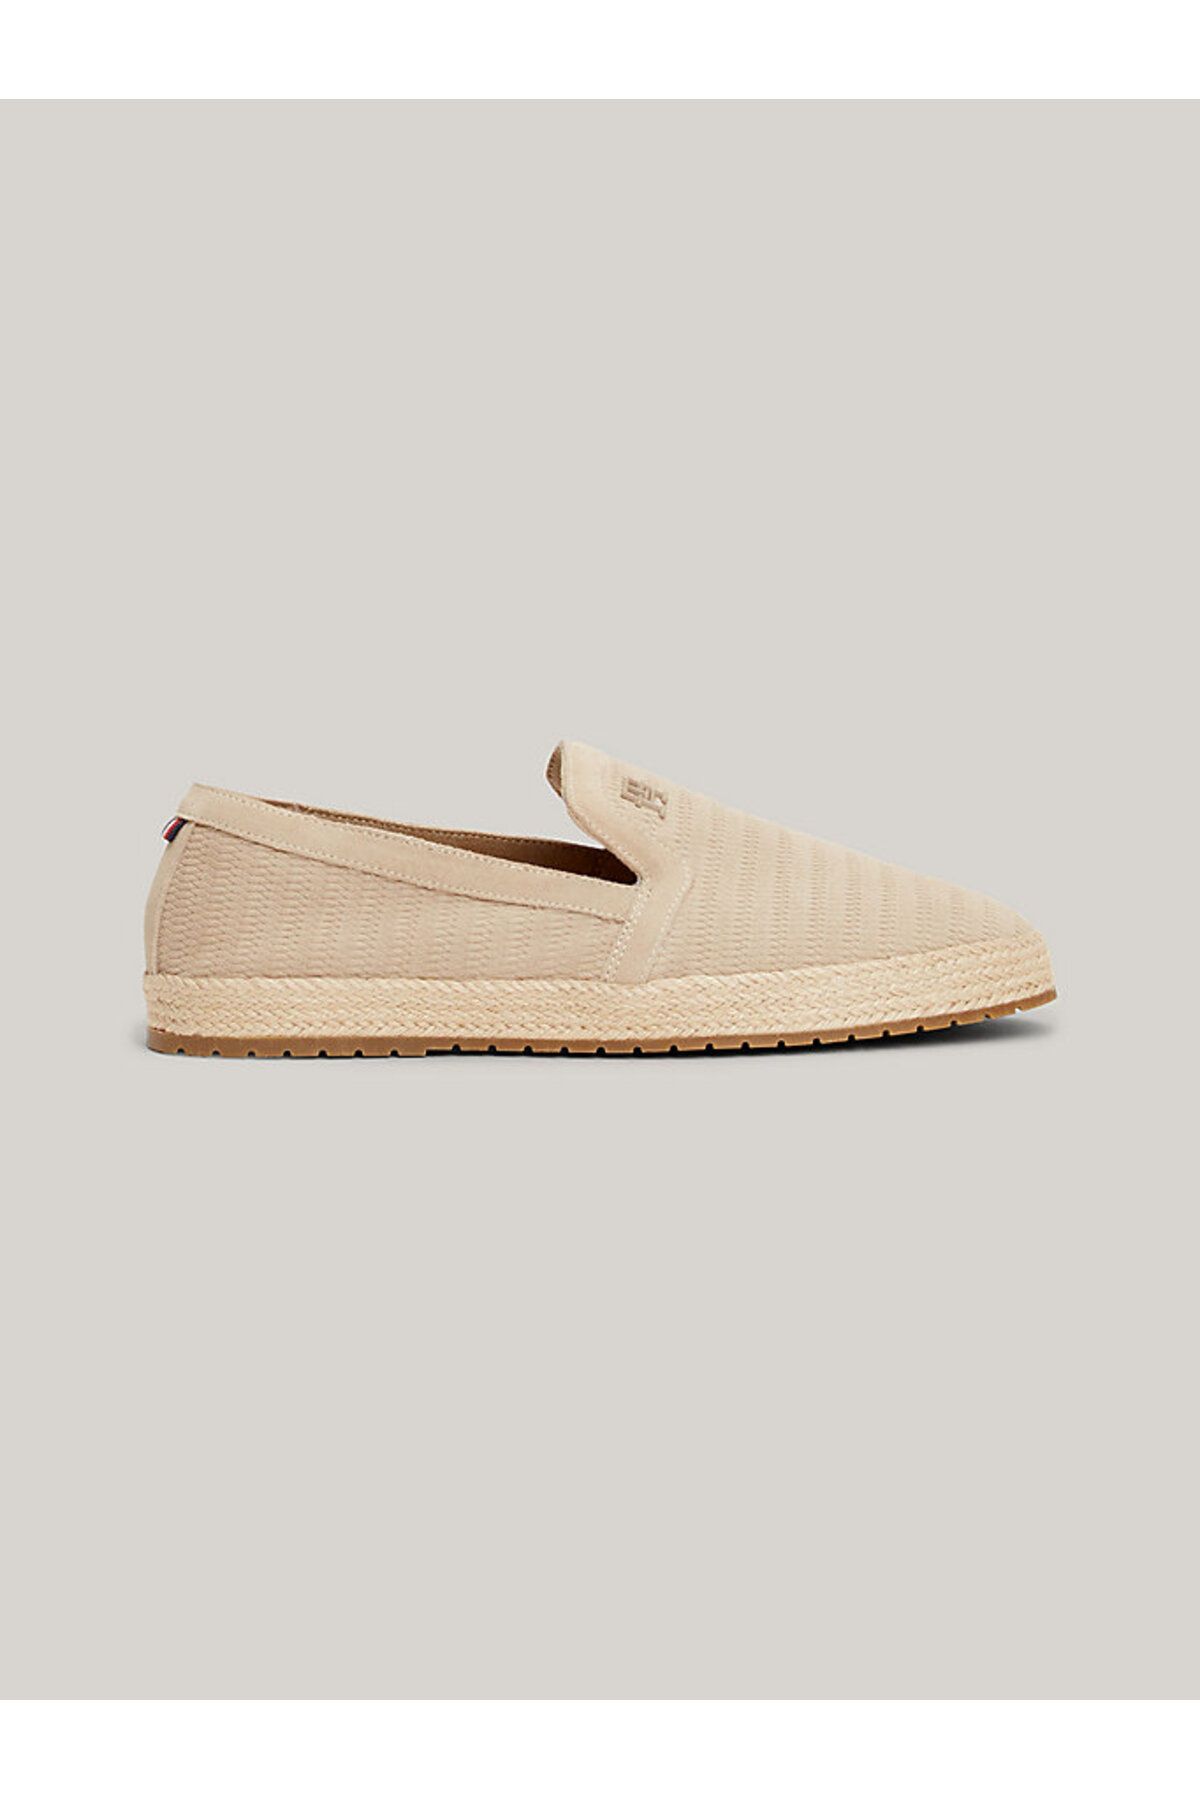 Tommy Hilfiger TH ESAPDRILLE CLASSIC SUEDE